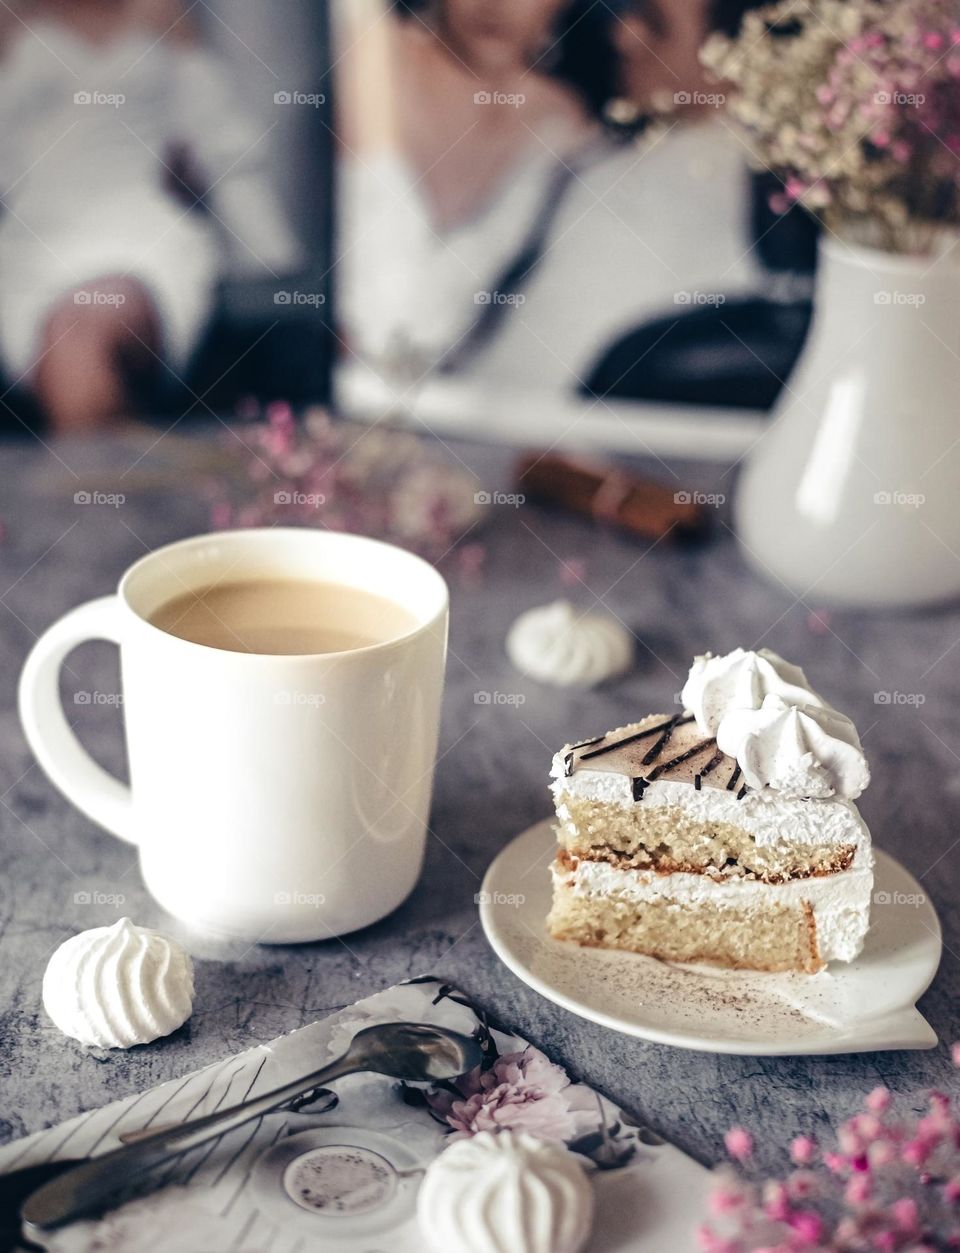 delicious sweet breakfast a piece of cake and a mug of coffee with milk, on a gentle neutral background